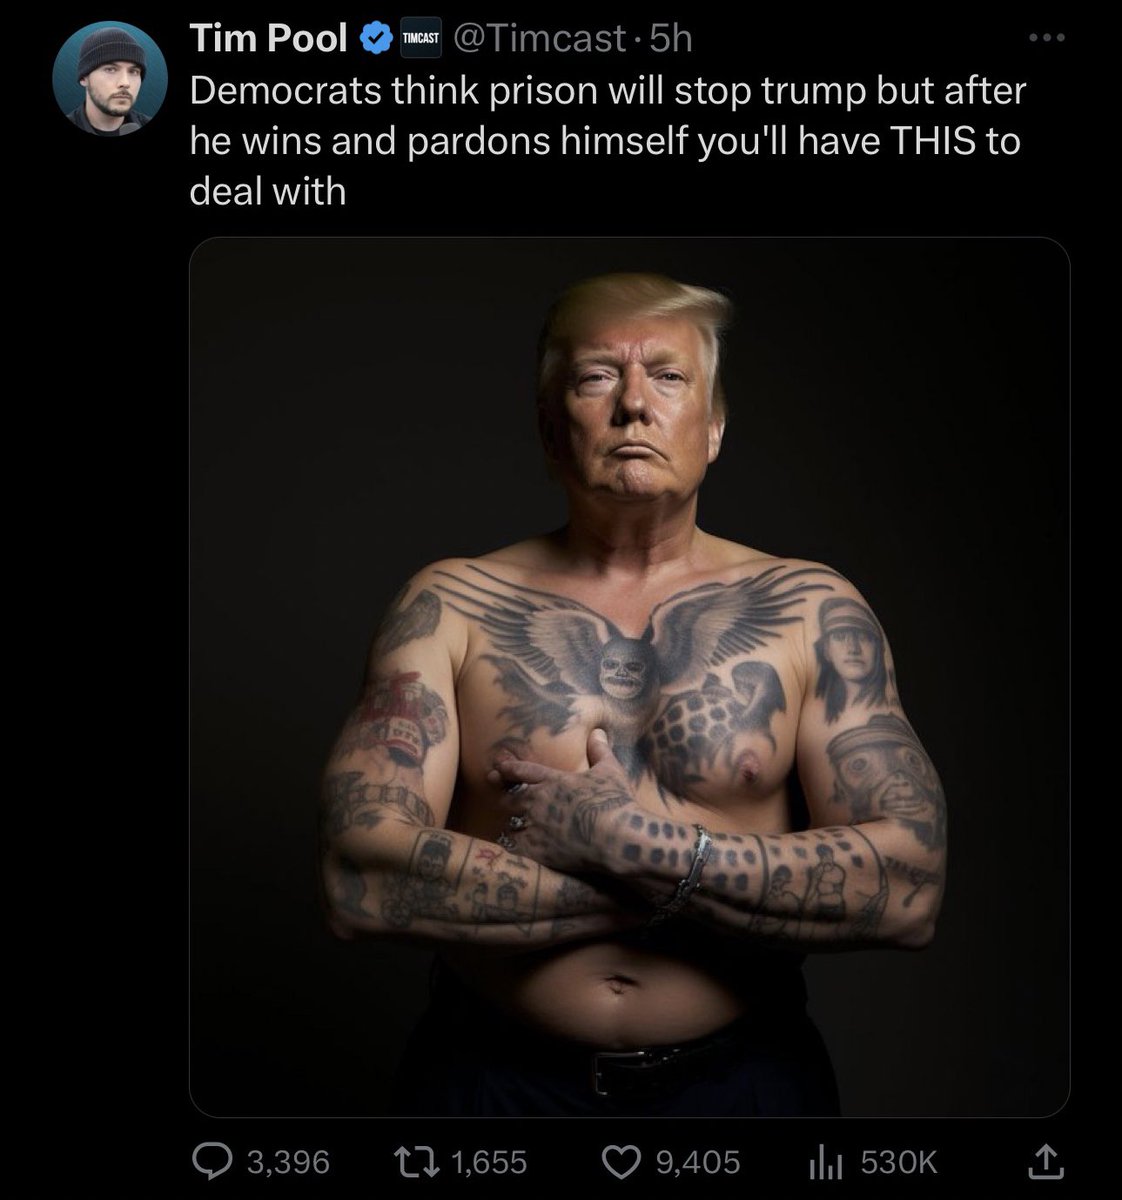 “honey we have to reschedule our date I have to wait for my AI image of tattooed muscular trump to finish generating”